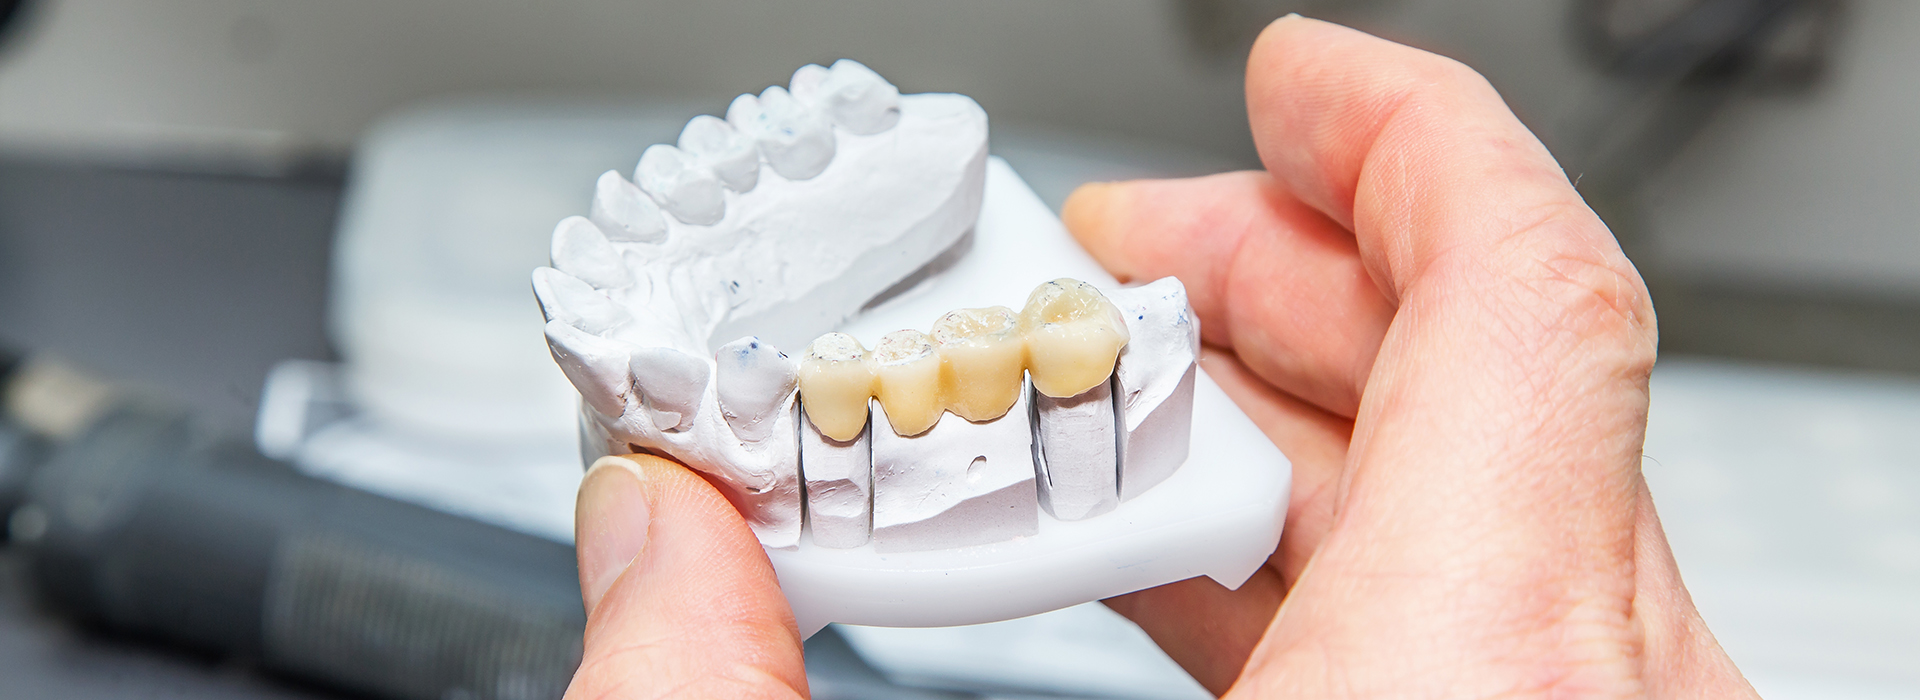 Pauly Dental | Extractions, Implant Dentistry and Root Canals